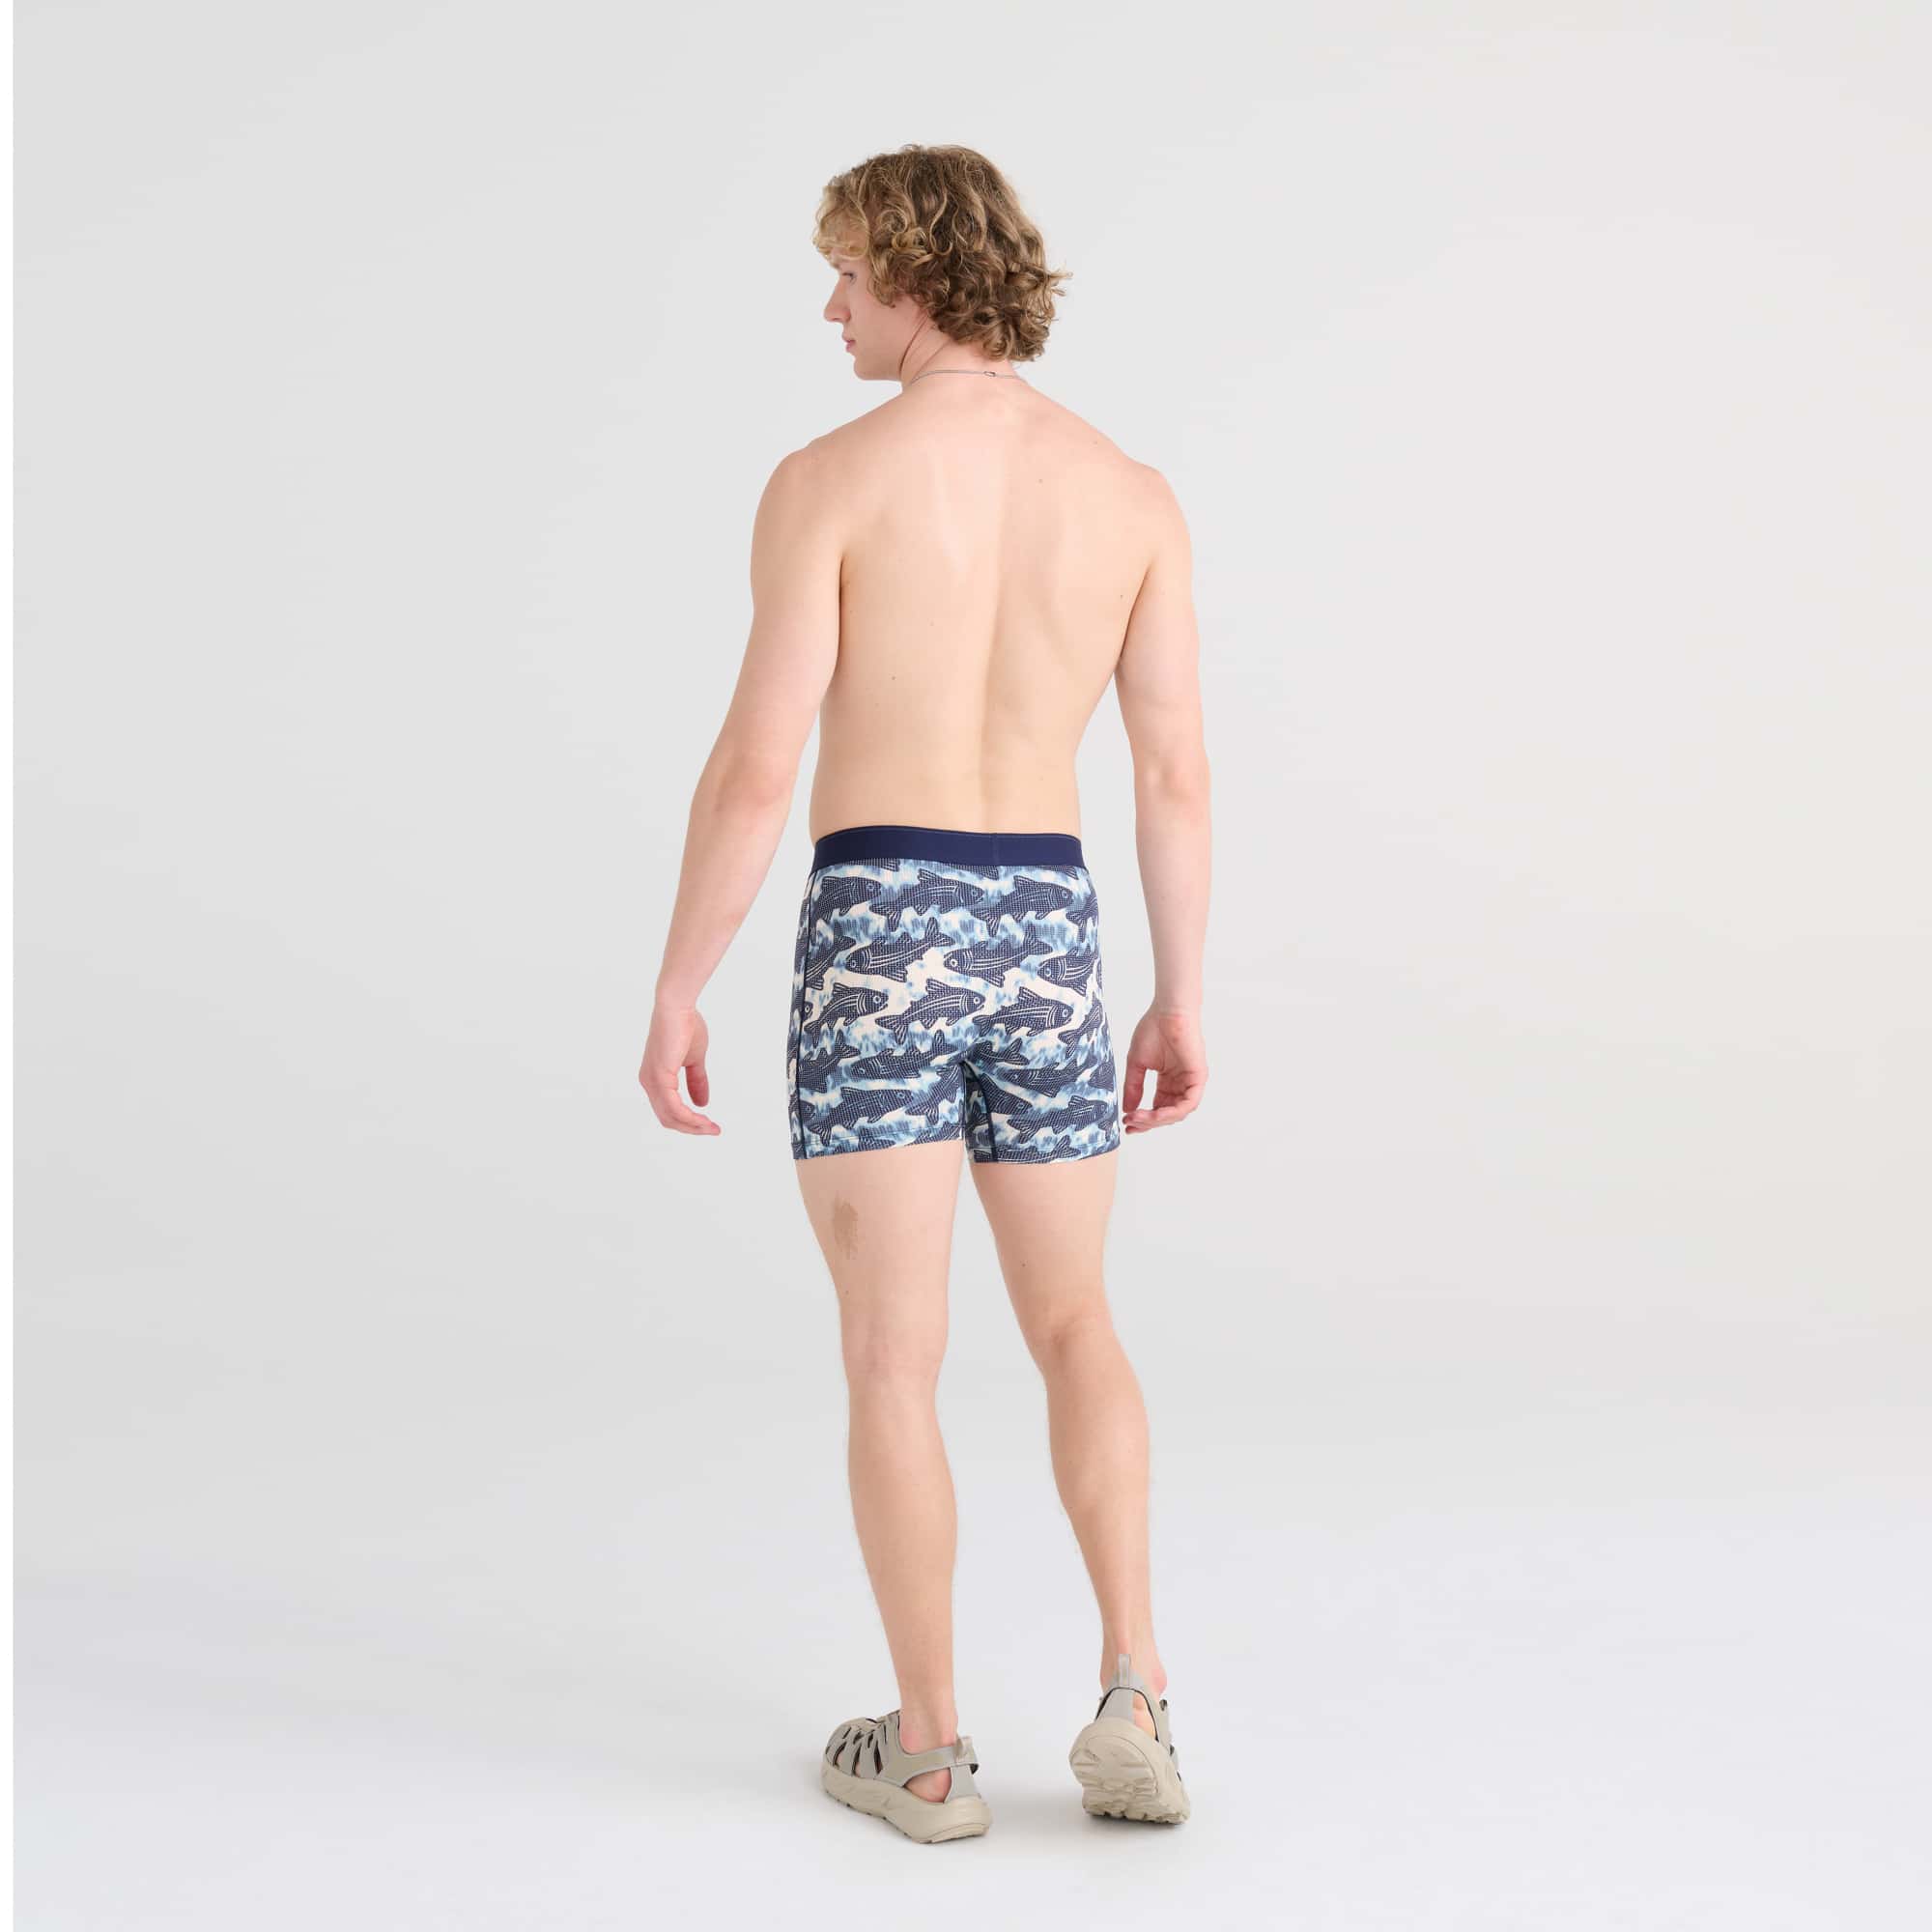 Back - Model wearing Quest Baselayer Boxer Brief in Upstream- Twilight